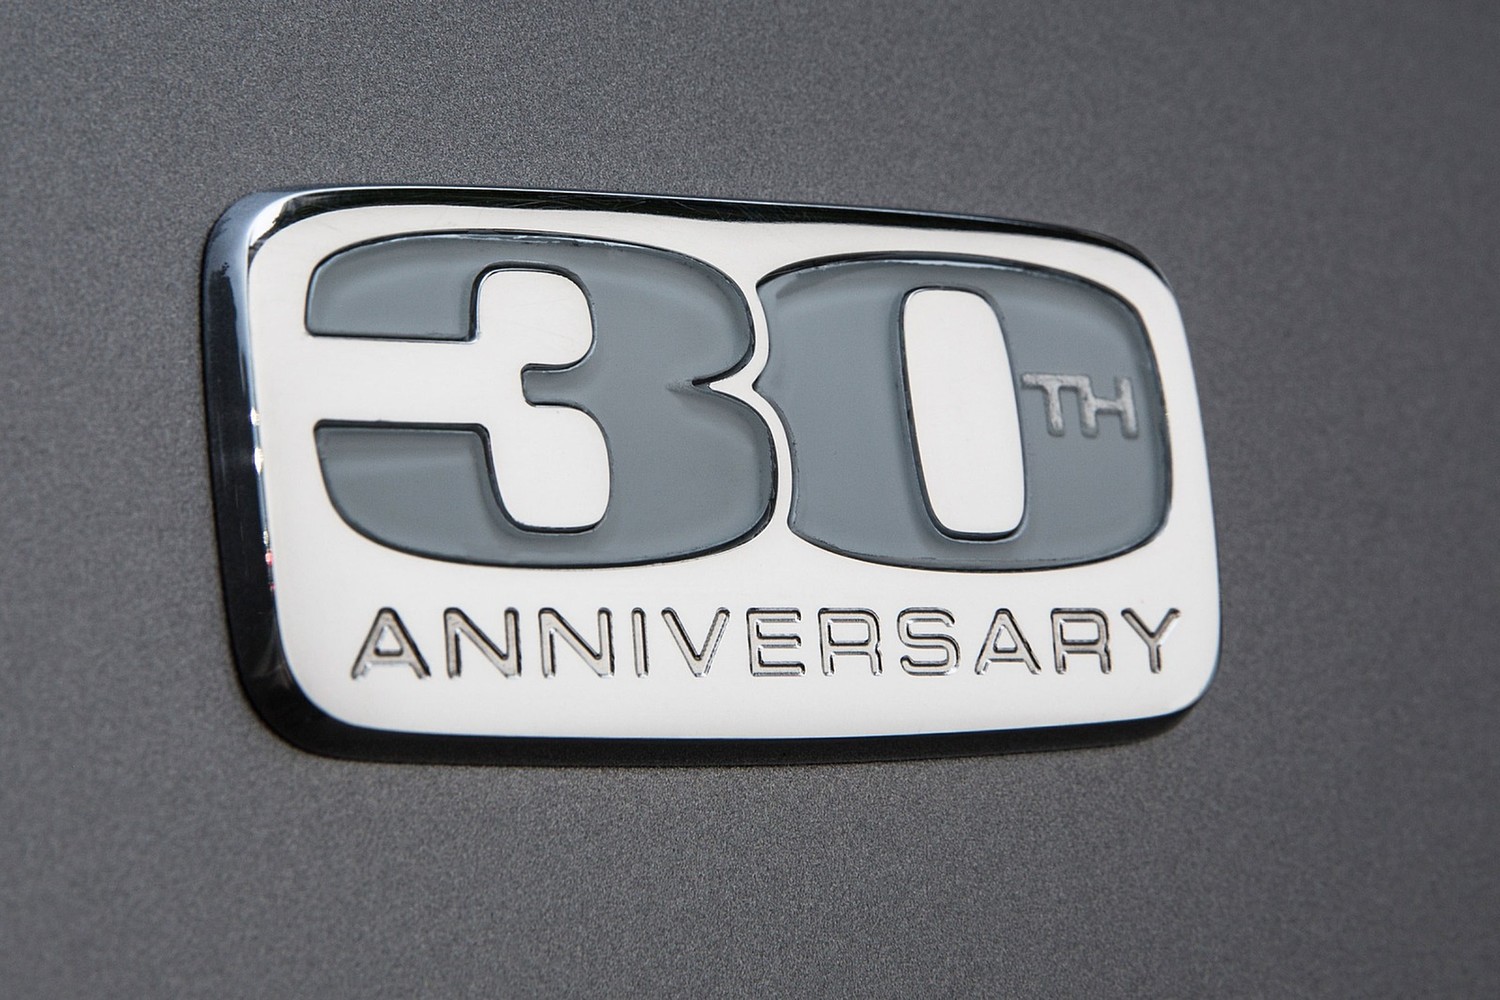 2016 Chrysler Town and Country Anniversary Edition Passenger Minivan Front Badge